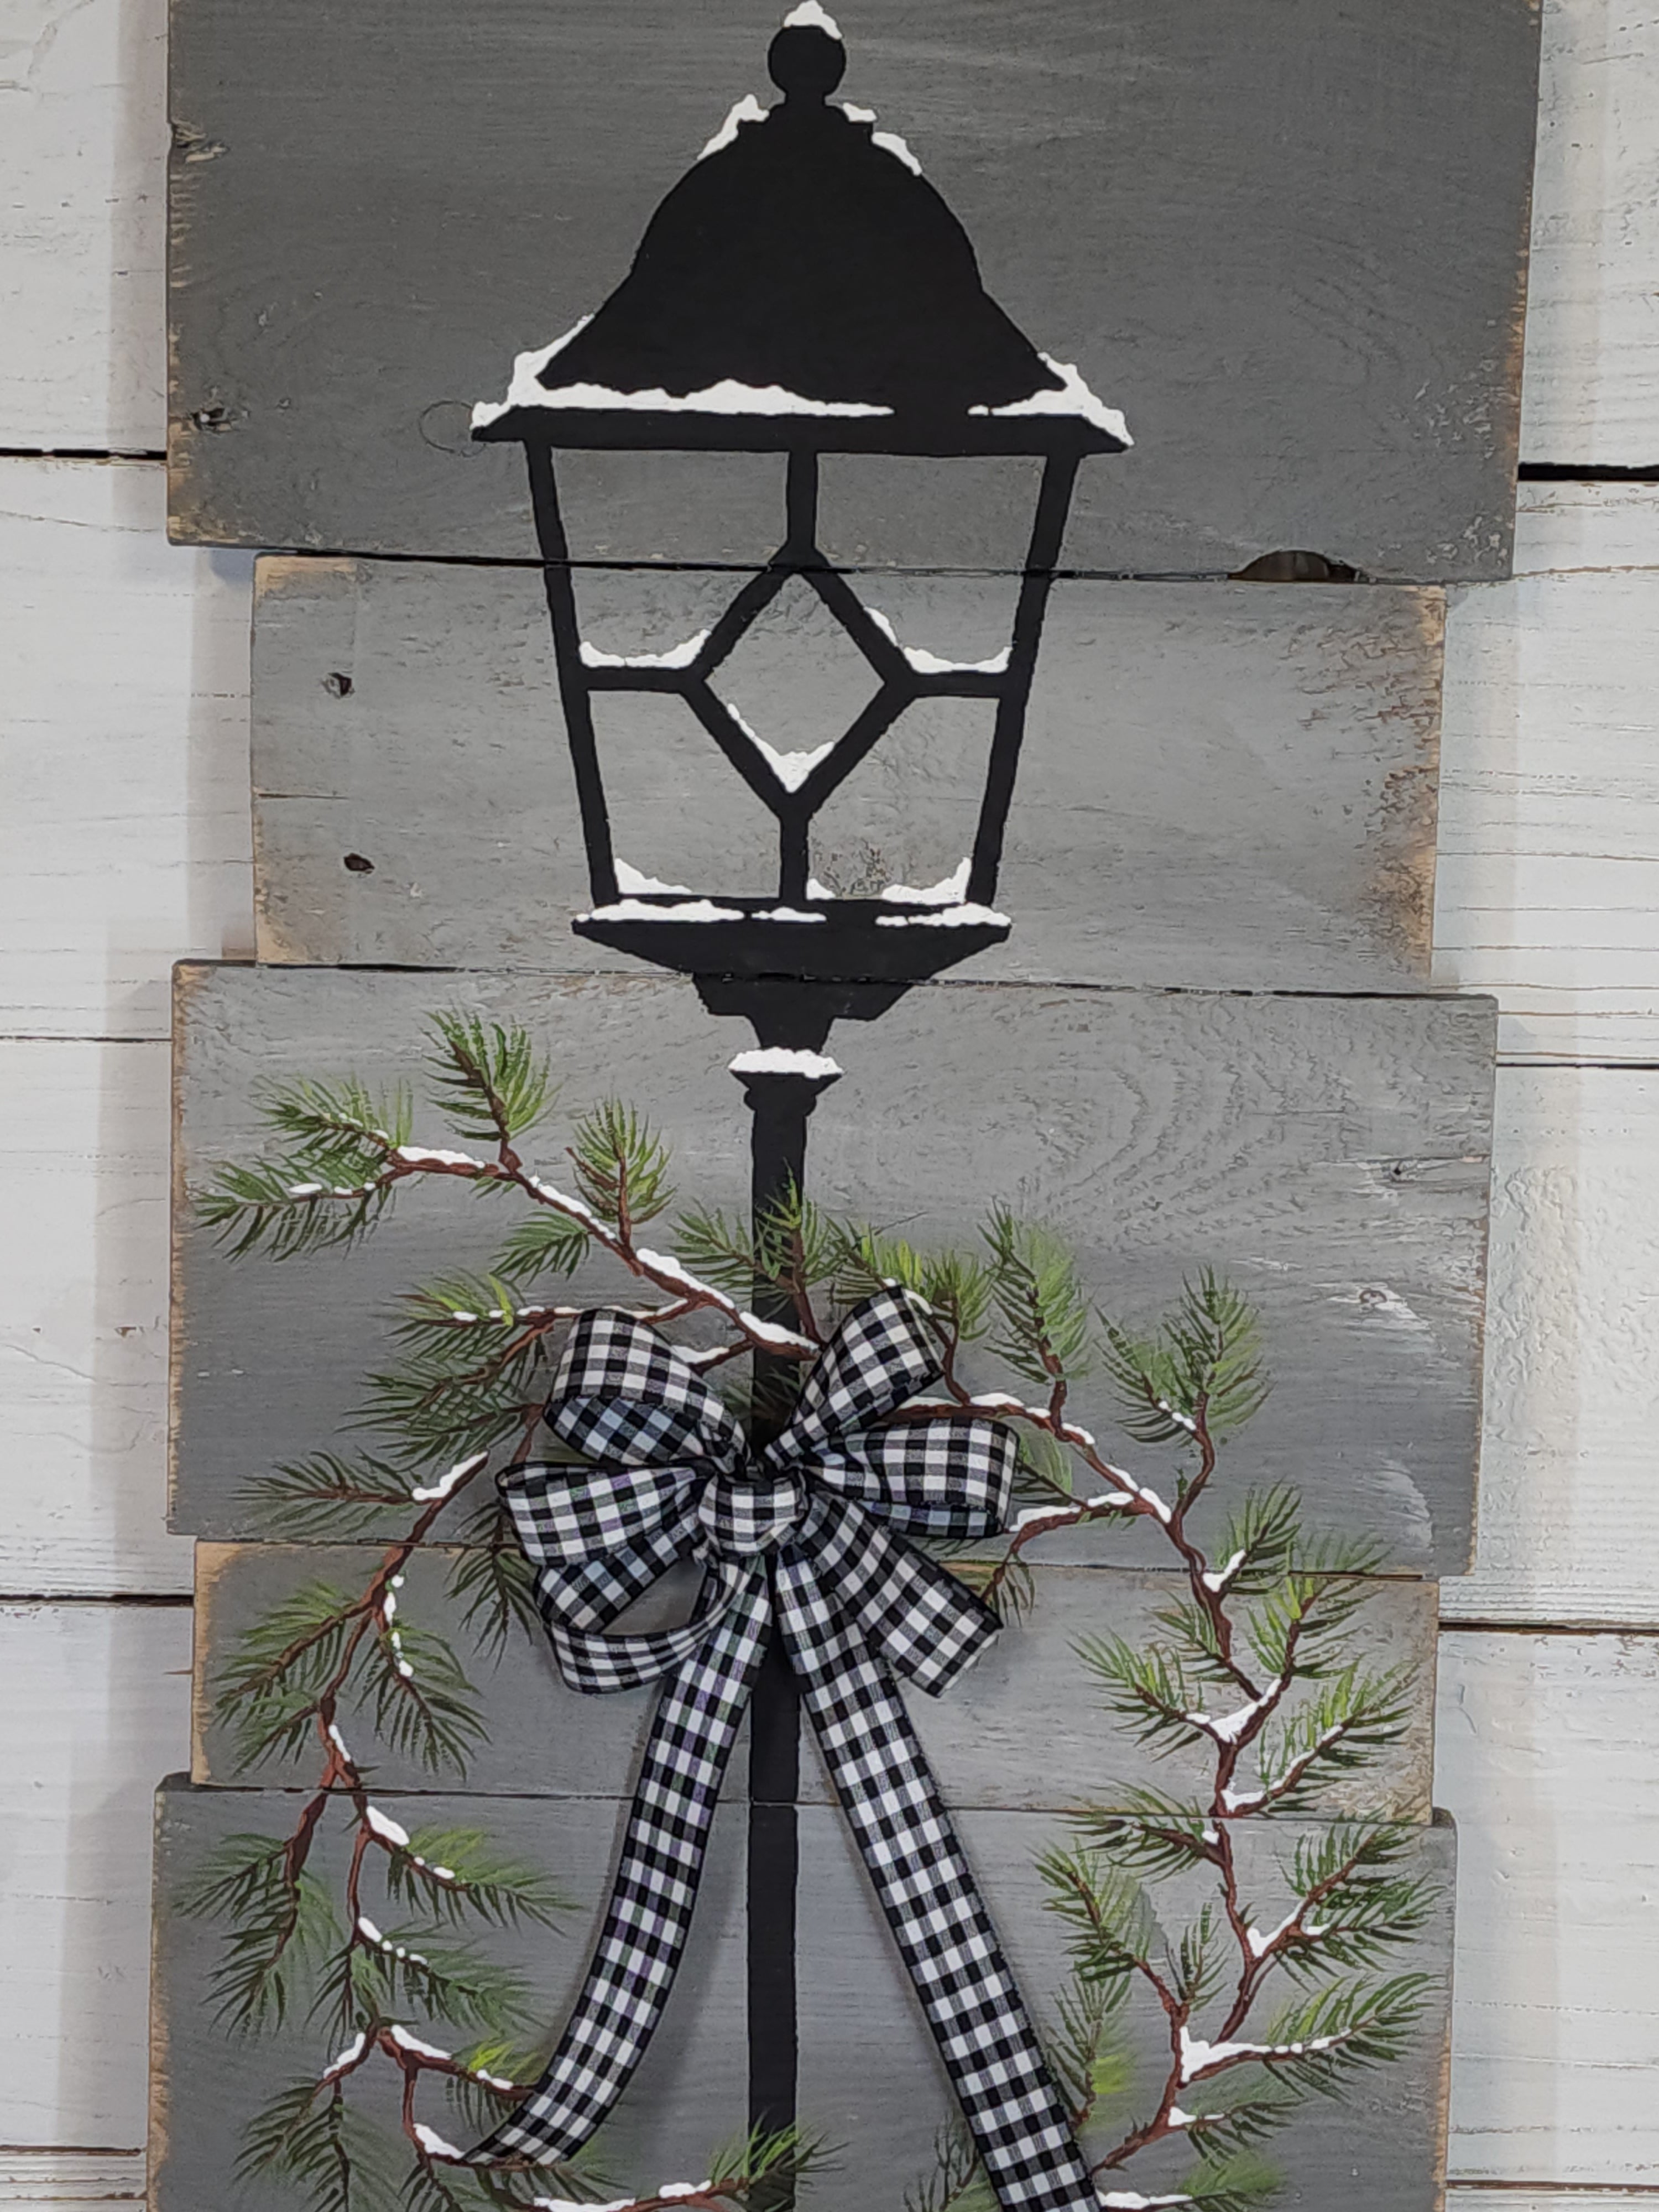 Merry Christmas pallet wood welcome sign, Hand painted pine branch wreath on lantern, buffalo plaid bow, black light pole